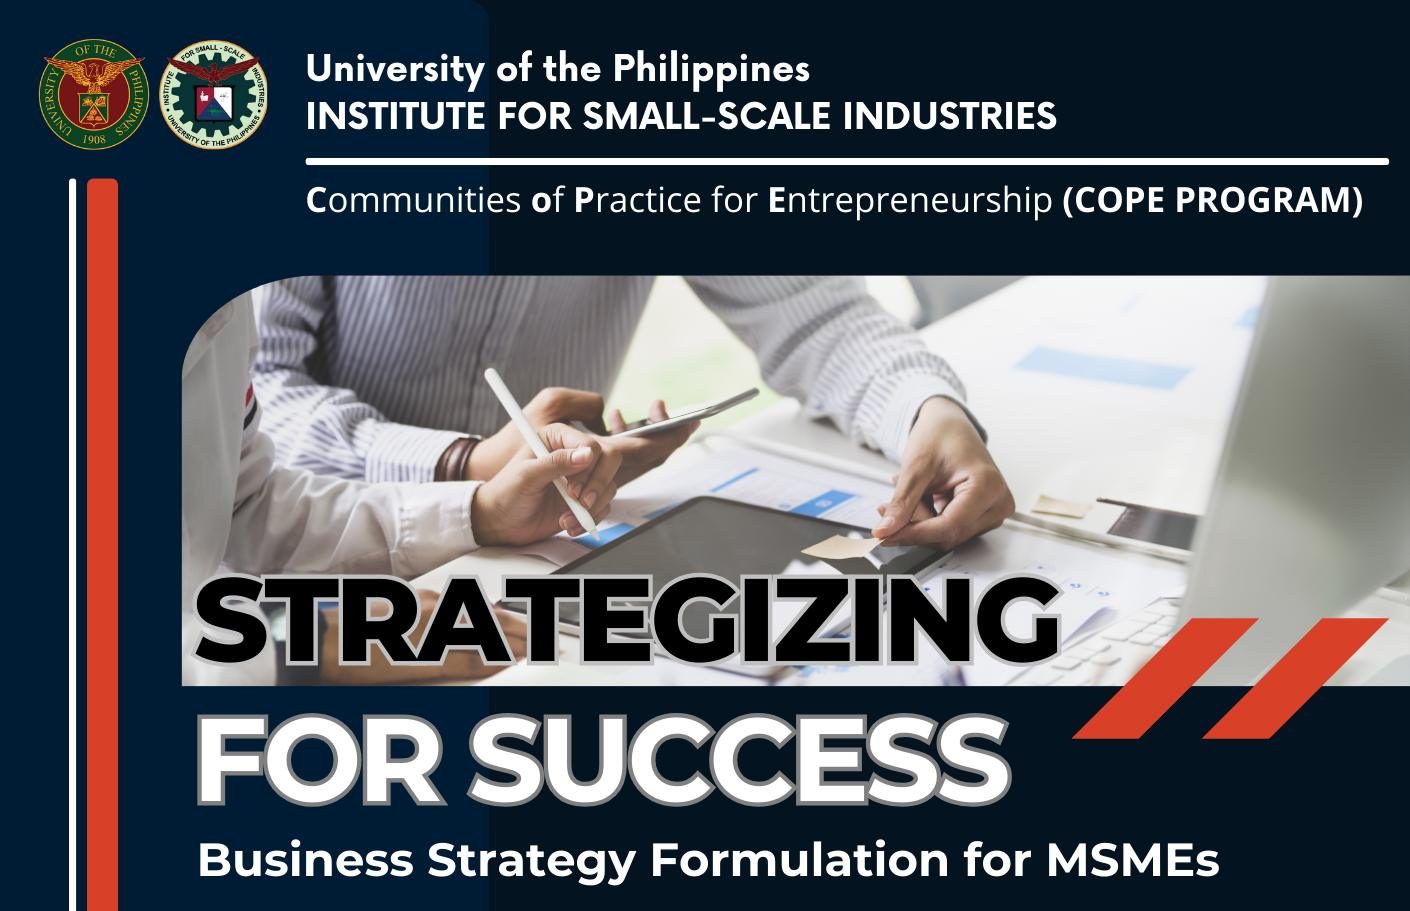 Strategizing for Success: Business Strategy Formulation for MSMEs